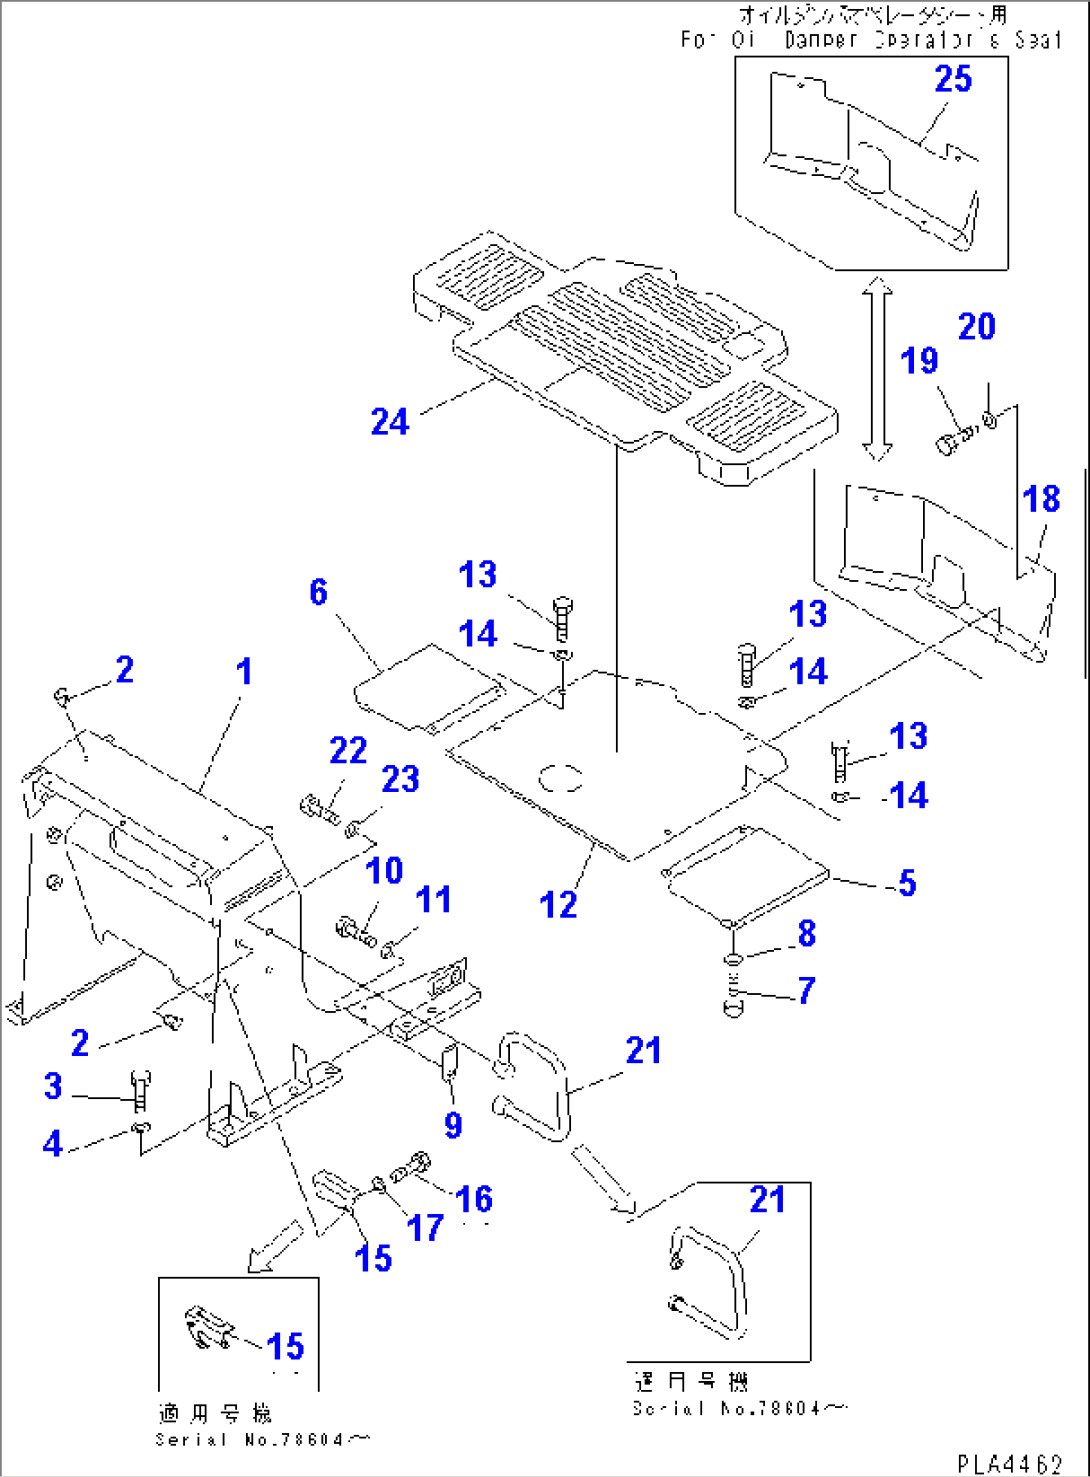 LOADER FRAME AND FLOOR PLATE (FOR TWO LEVERS STEERING)